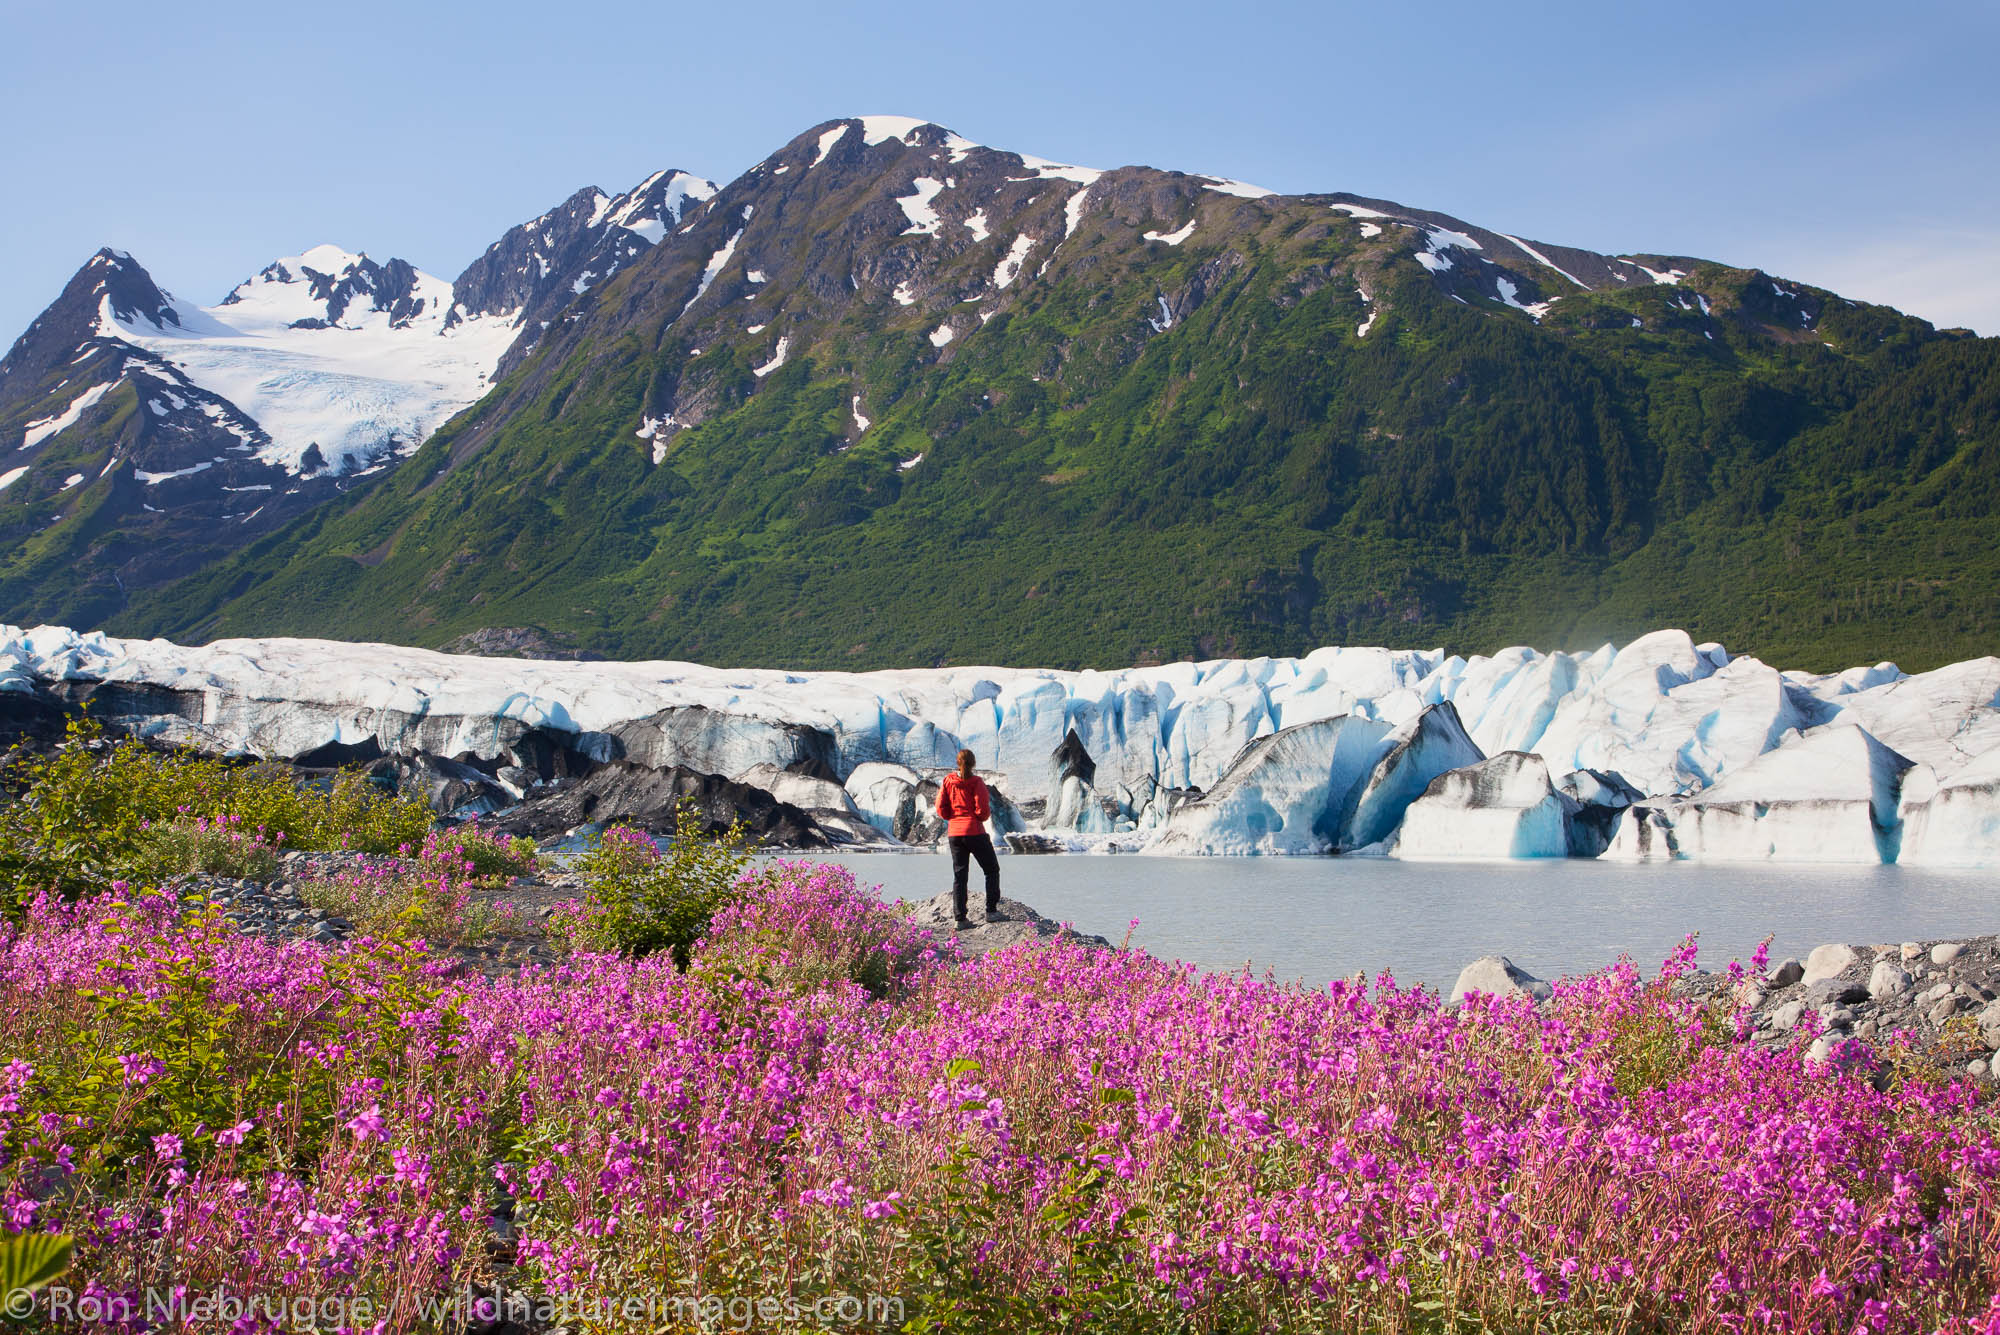 A hiker enjoys the wildflowers along the lake in front of Spencer Glacier, Chugach National Forest, Alaska.